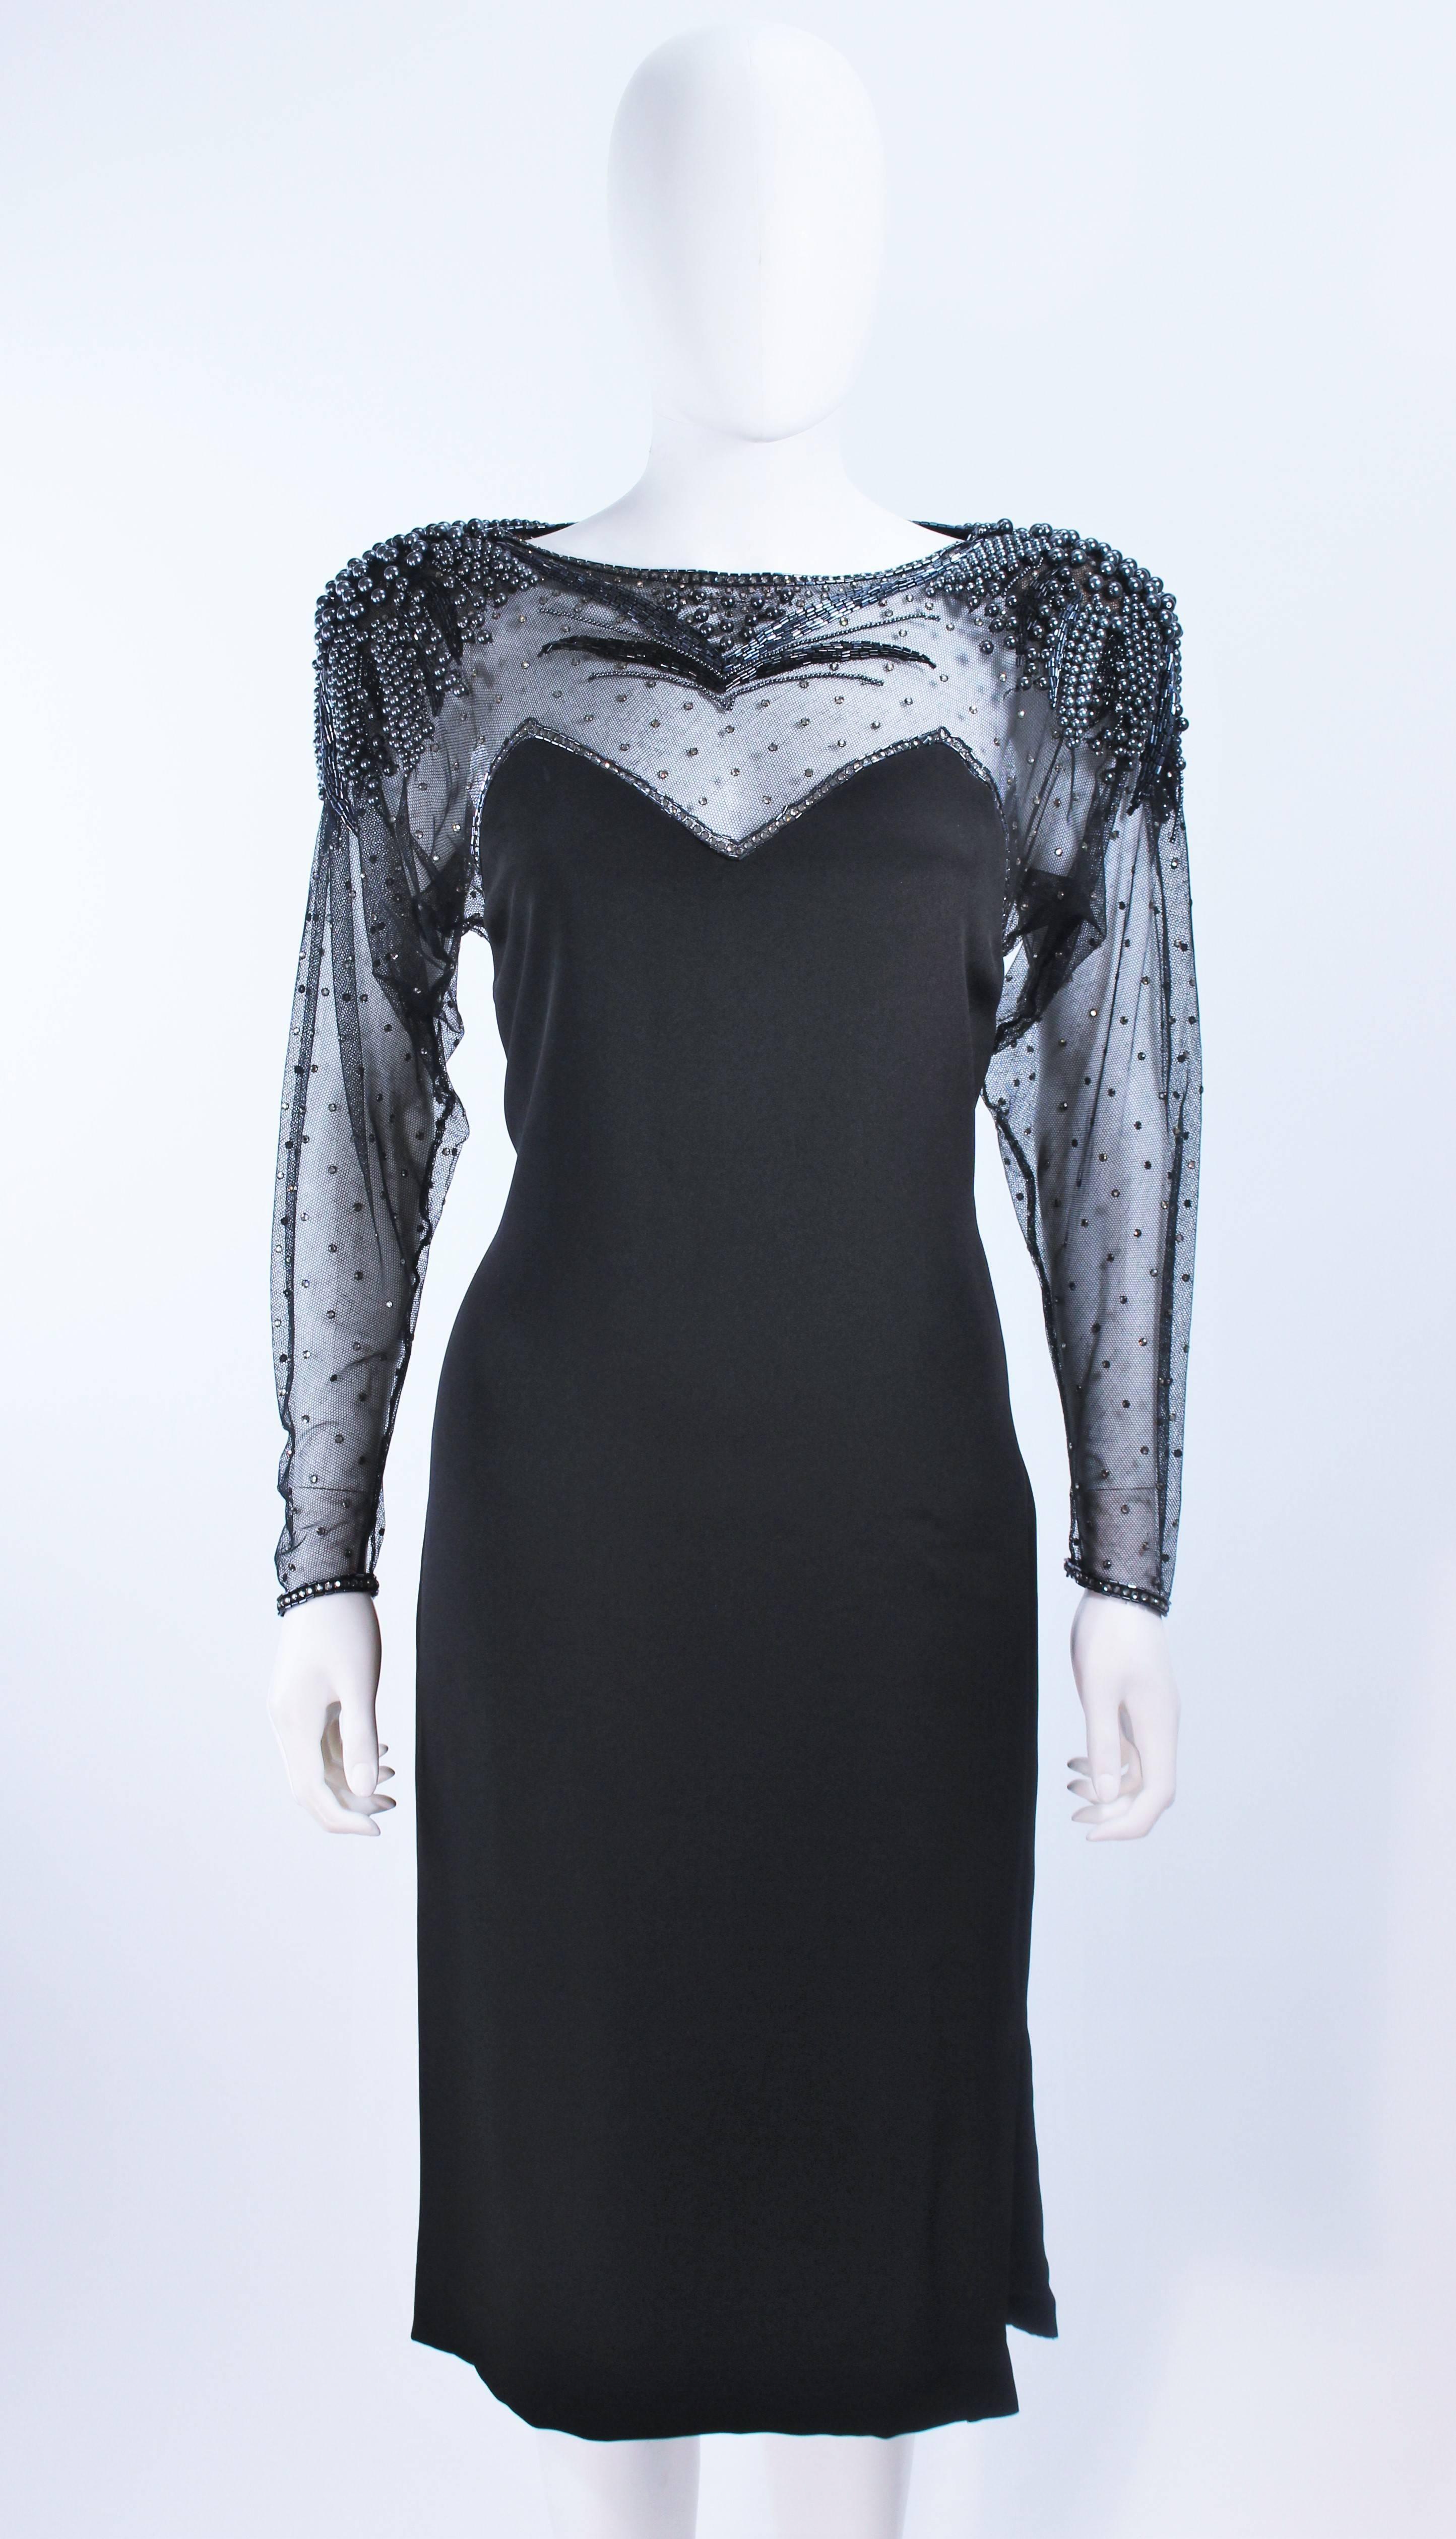 This Frank Composto cocktail dress is composed of a black silk and features sheer sleeves with beaded applique. There is a center back zipper closure. In excellent vintage condition.

**Please cross-reference measurements for personal accuracy.